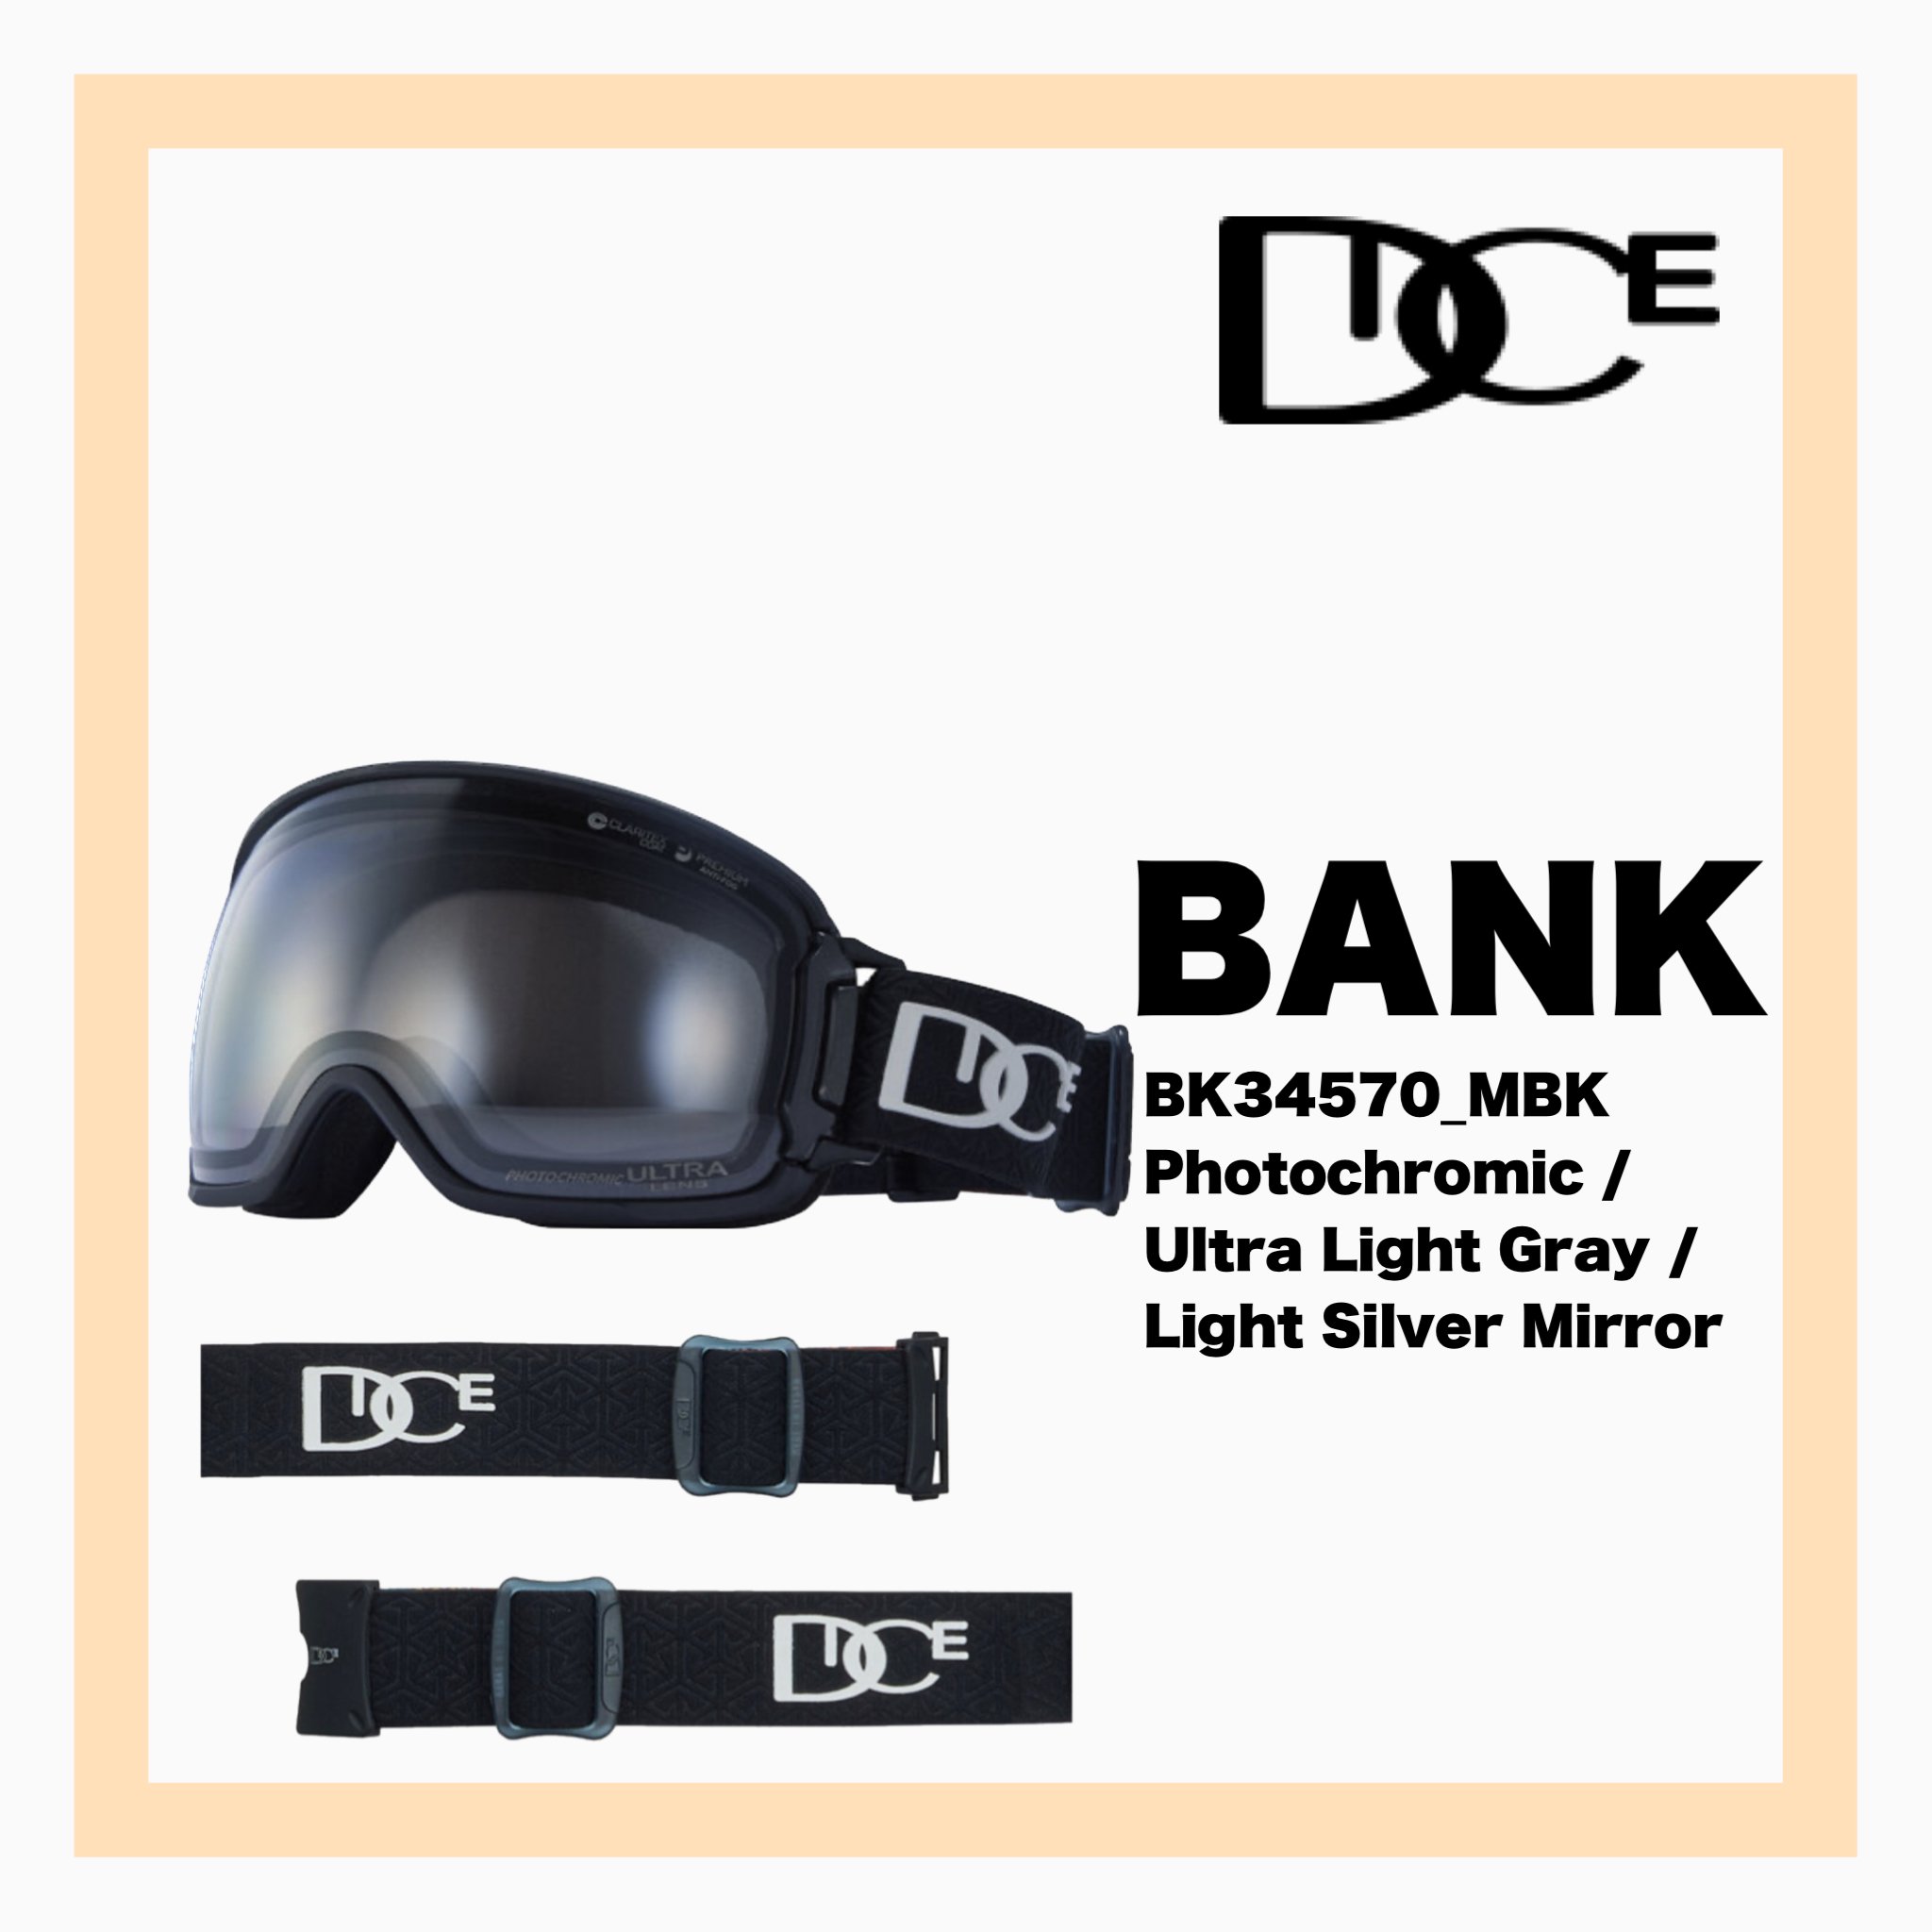 <img class='new_mark_img1' src='https://img.shop-pro.jp/img/new/icons34.gif' style='border:none;display:inline;margin:0px;padding:0px;width:auto;' />DICE BANK MBK Photochromic /Ultra Light Gray / Light Silver Mirror